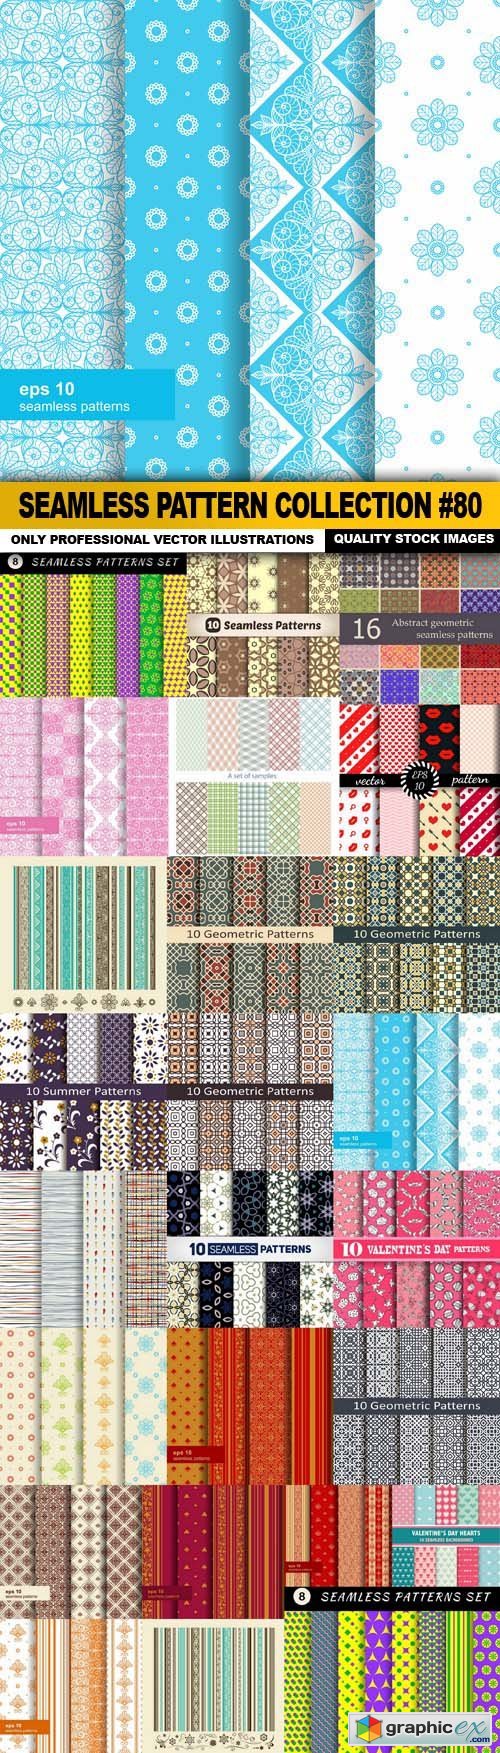 Seamless Pattern Collection #80